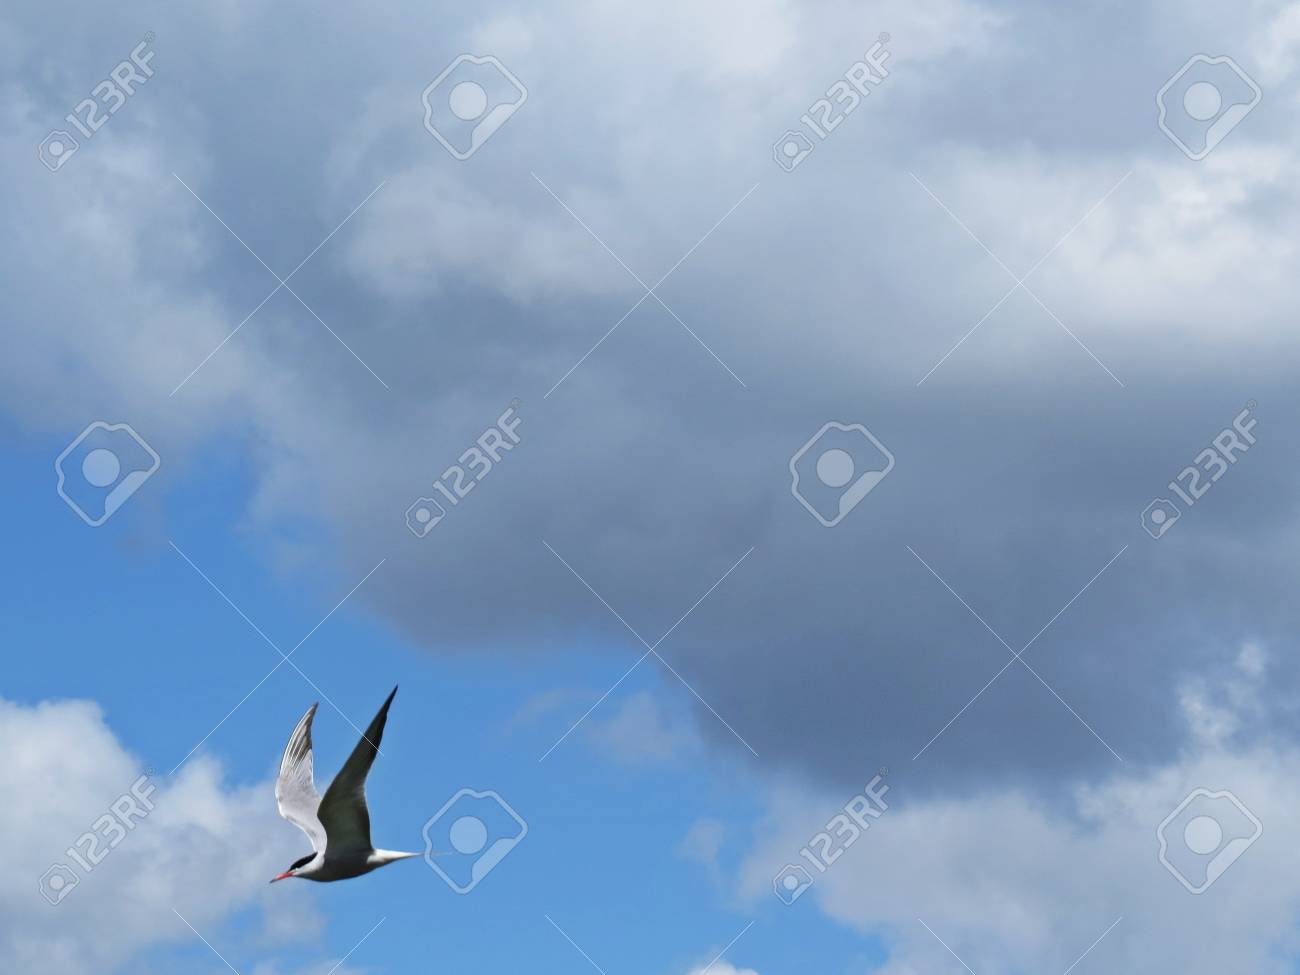 Seagull Mew Bird Flying At A Background Of Dark Storm Clouds